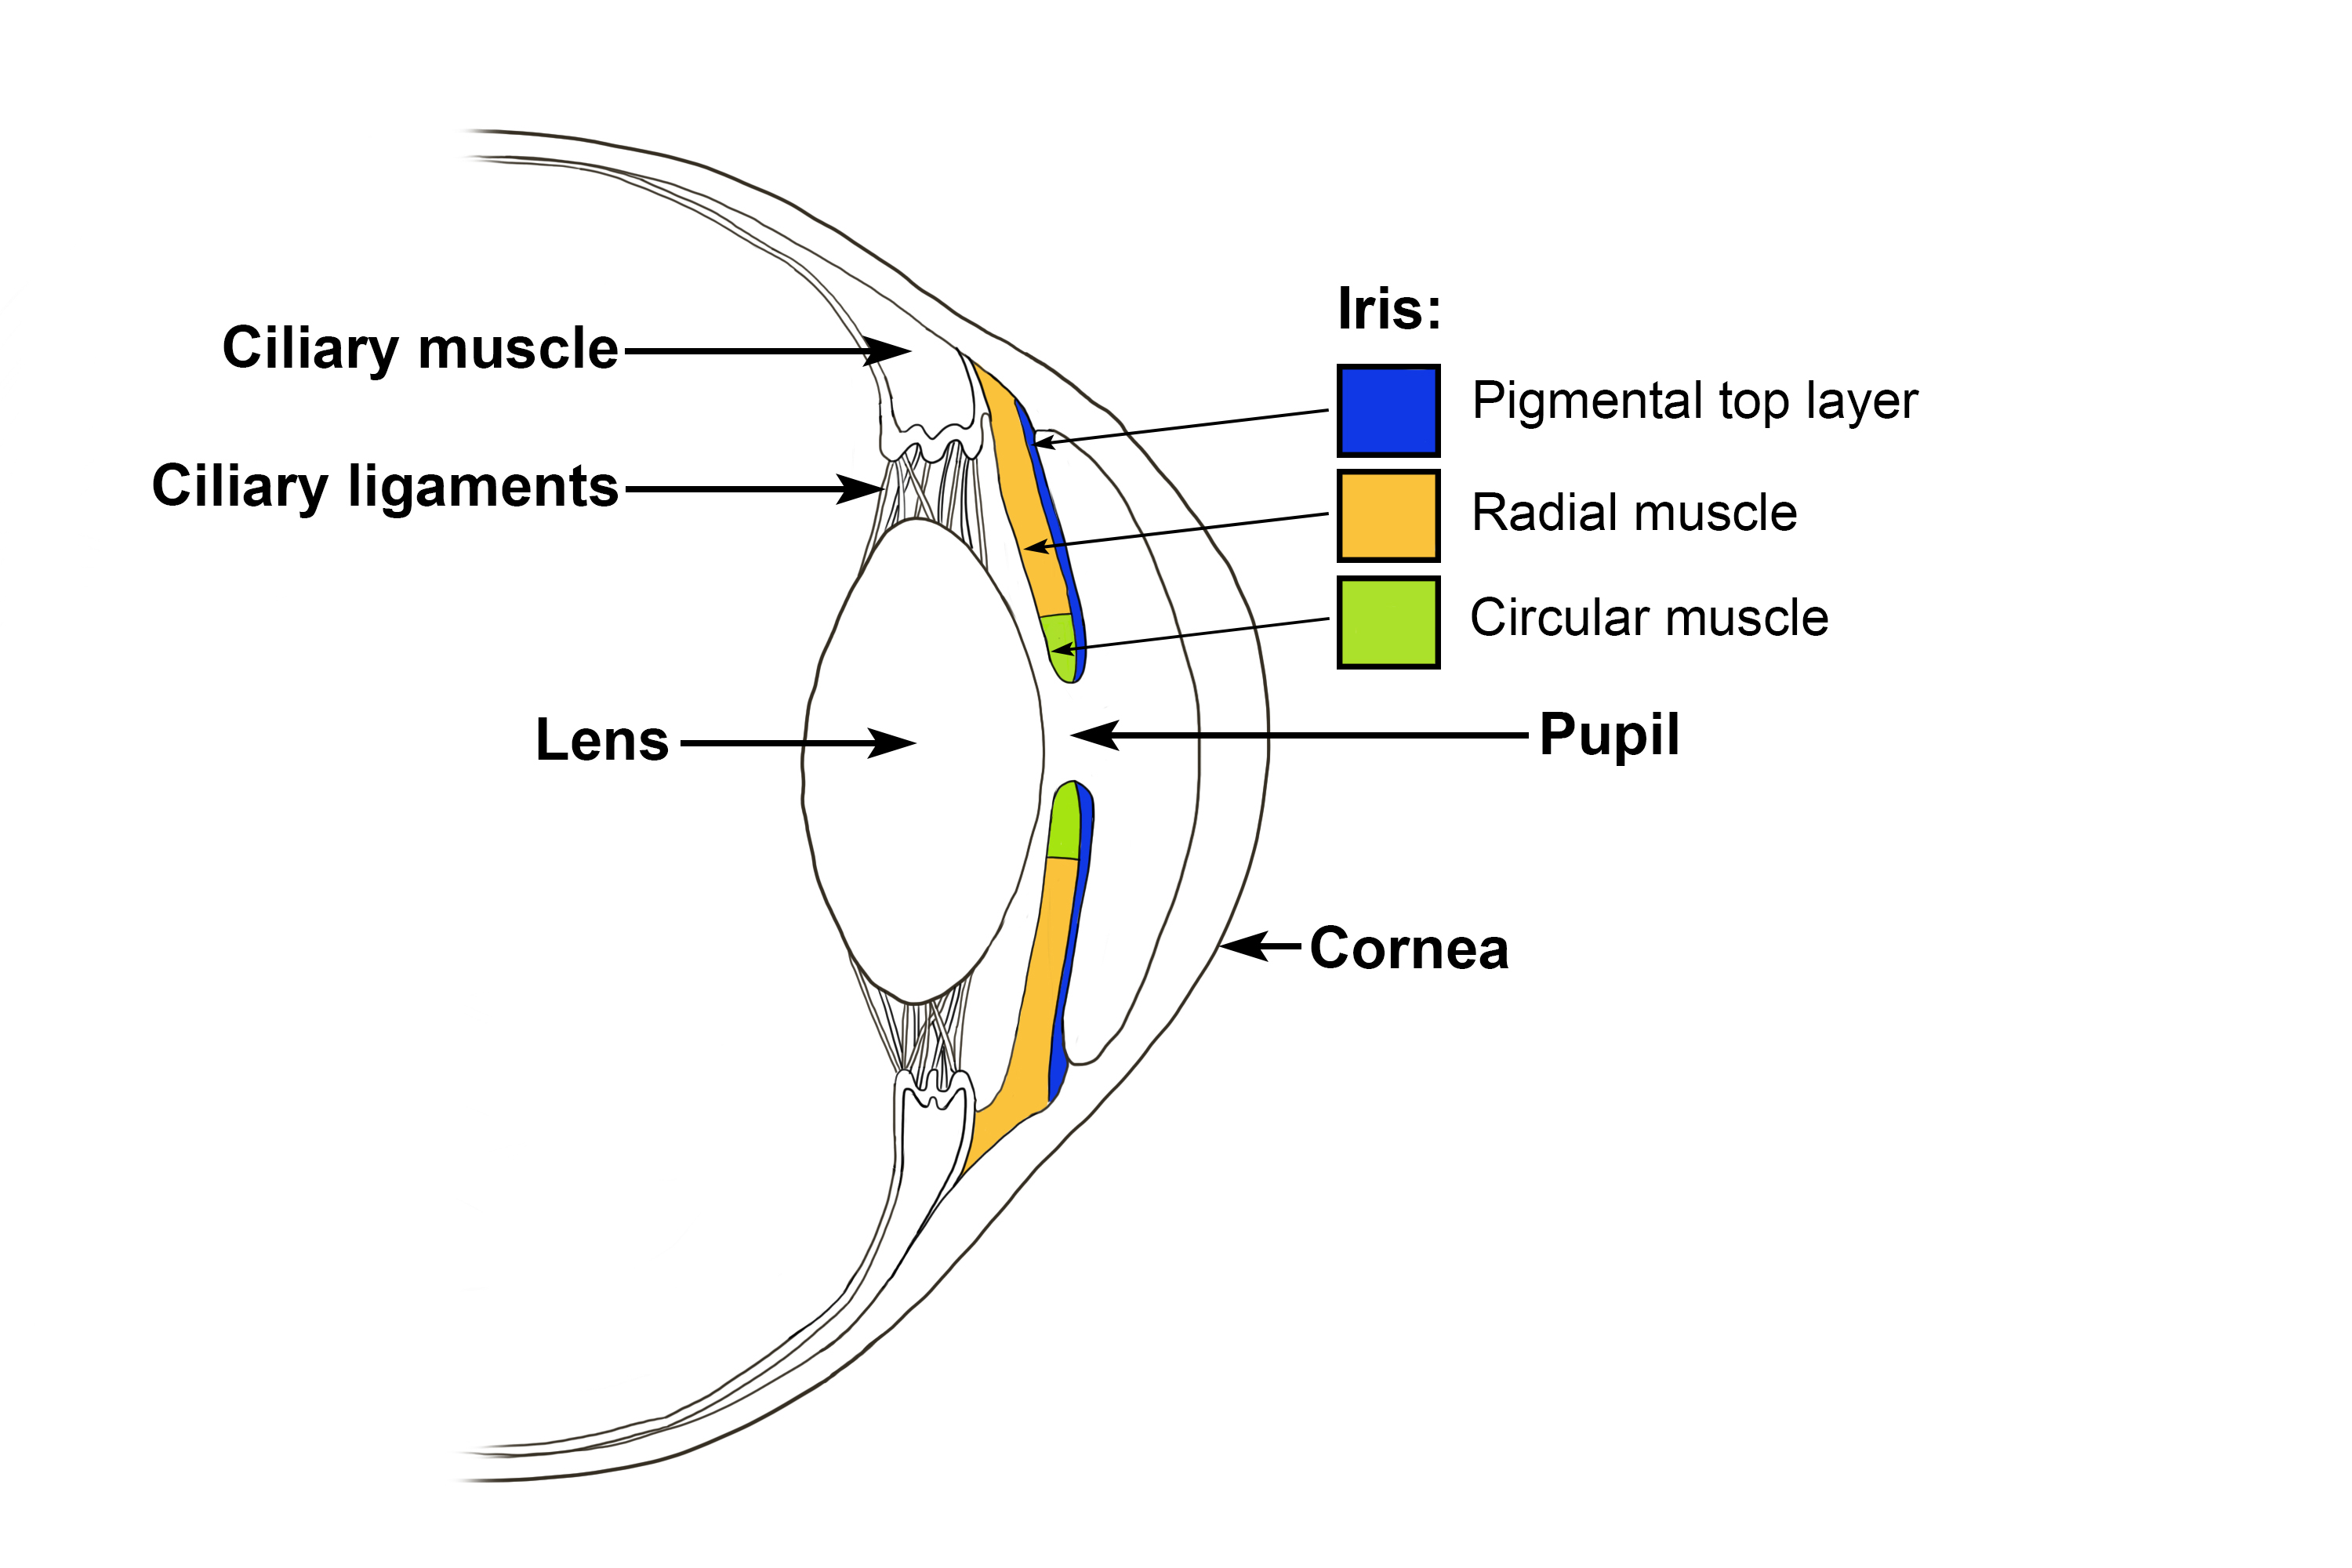 Side ward view of the antagonistic muscles also showing the ciliary muscles